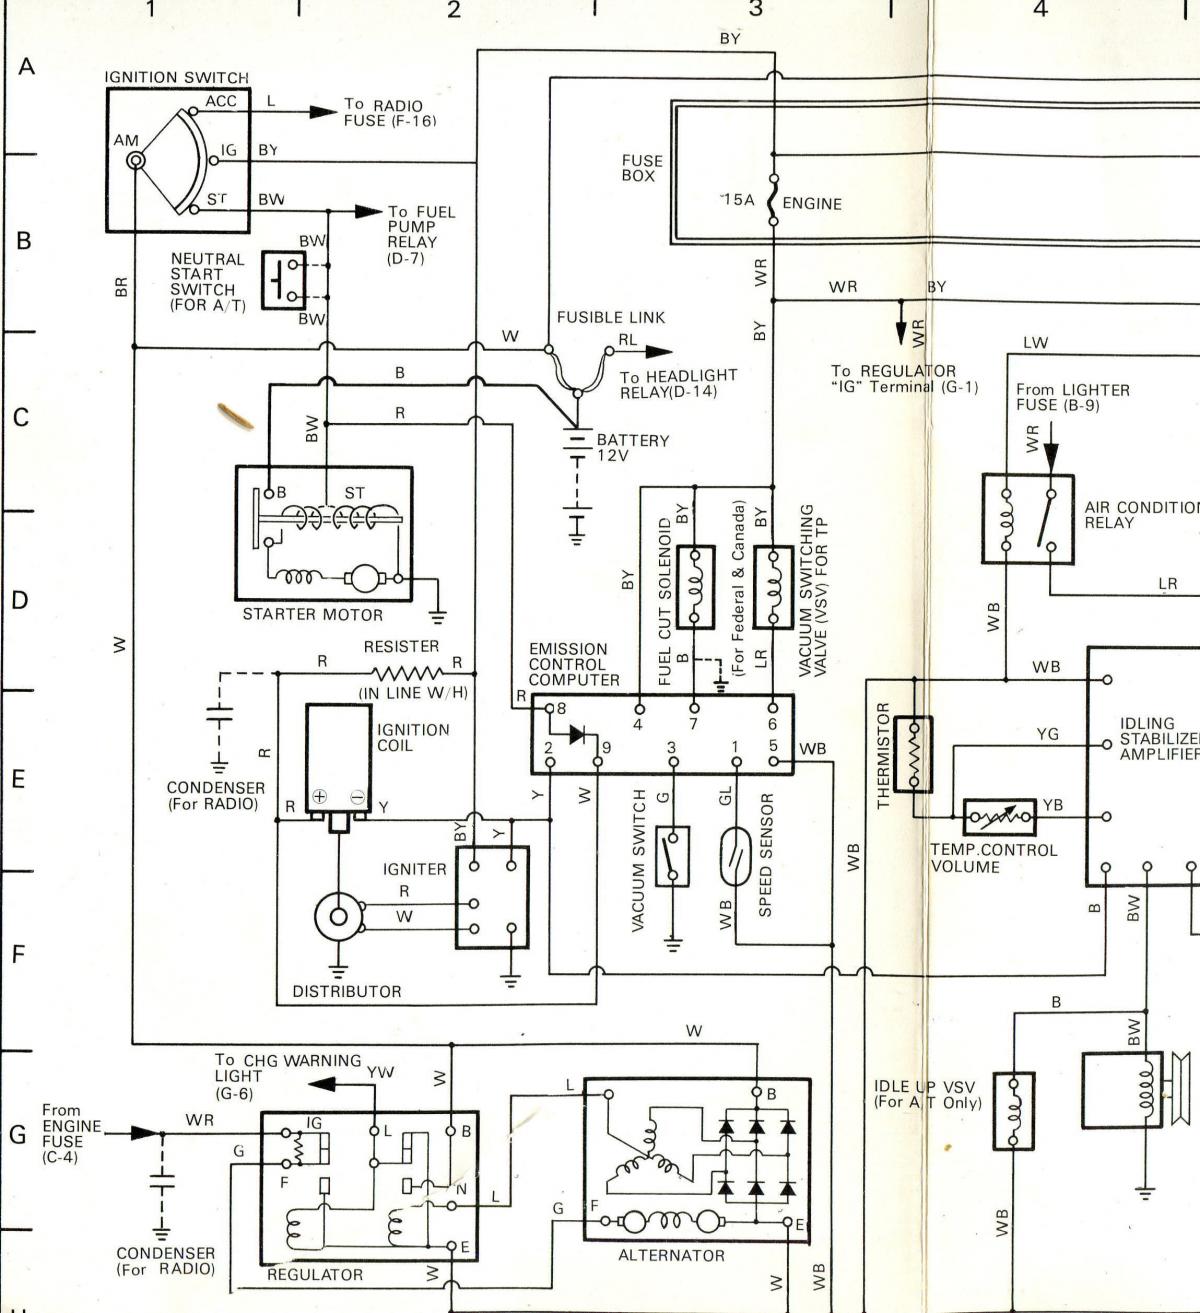 1978 Complete Factory Wiring Diagram - General Discussion - Toyota